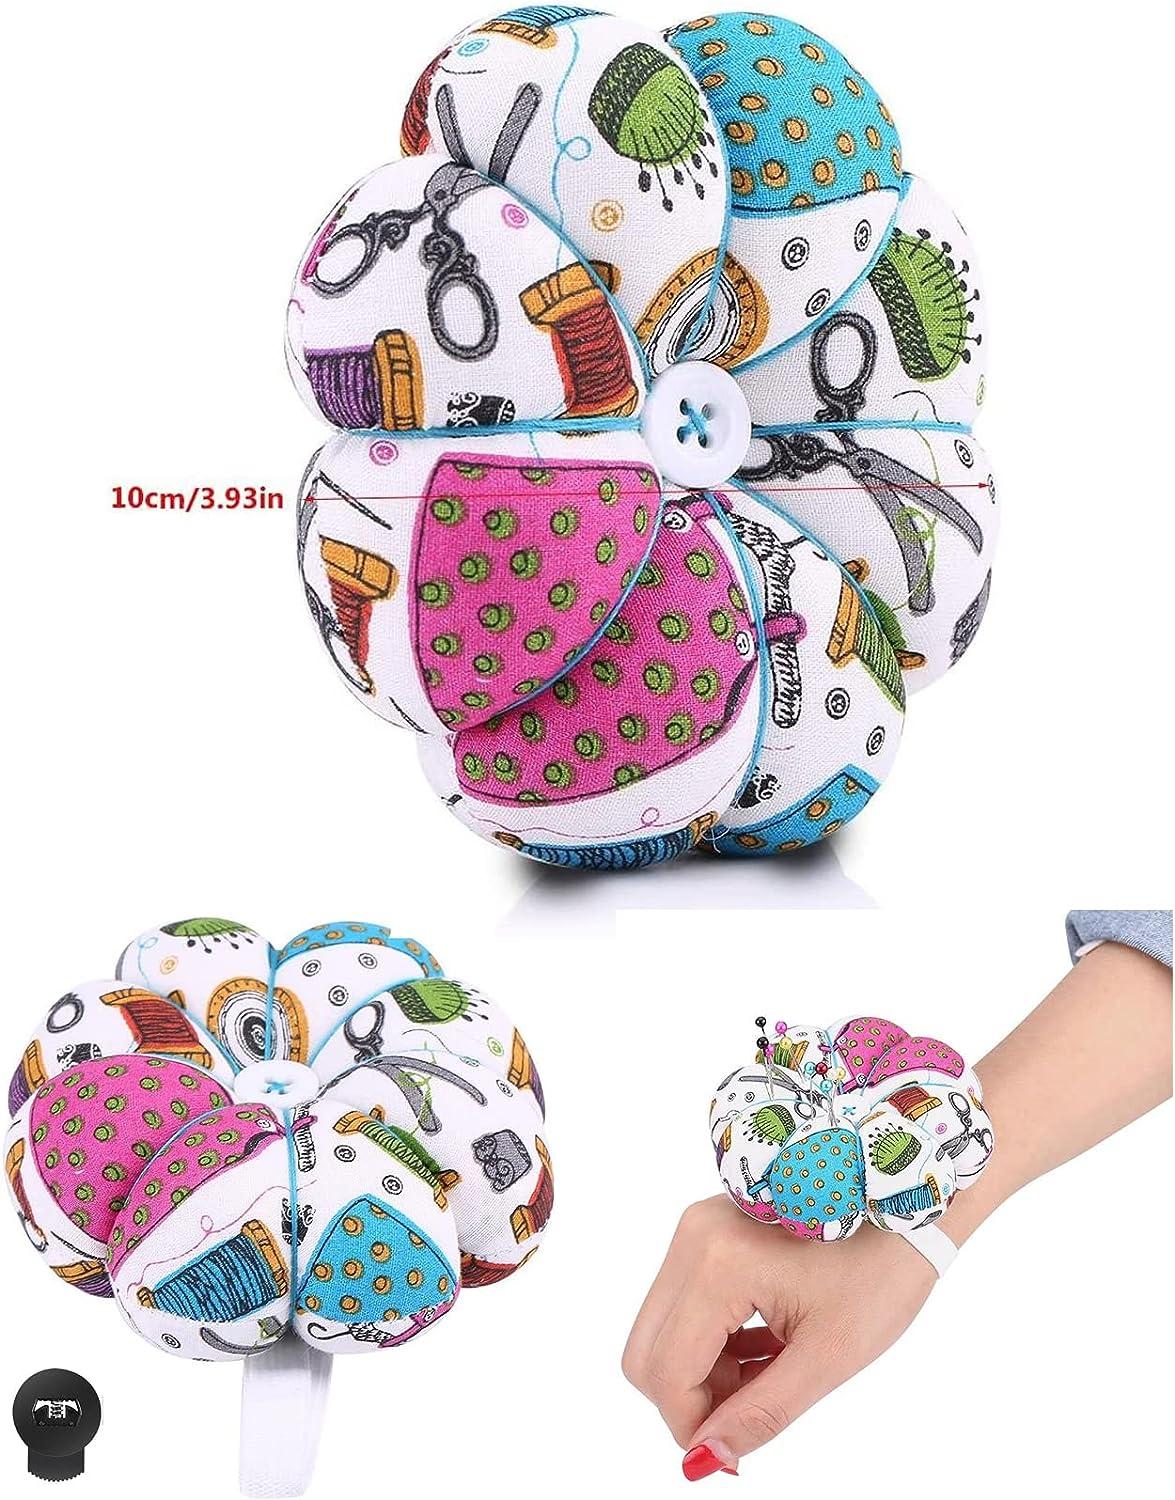 Elastic Wrist Pin Cushion Ring Pumpkin Shaped Wrist Pin Cushions for  Sewing, Needles Holder for Sewing (Brown Red)